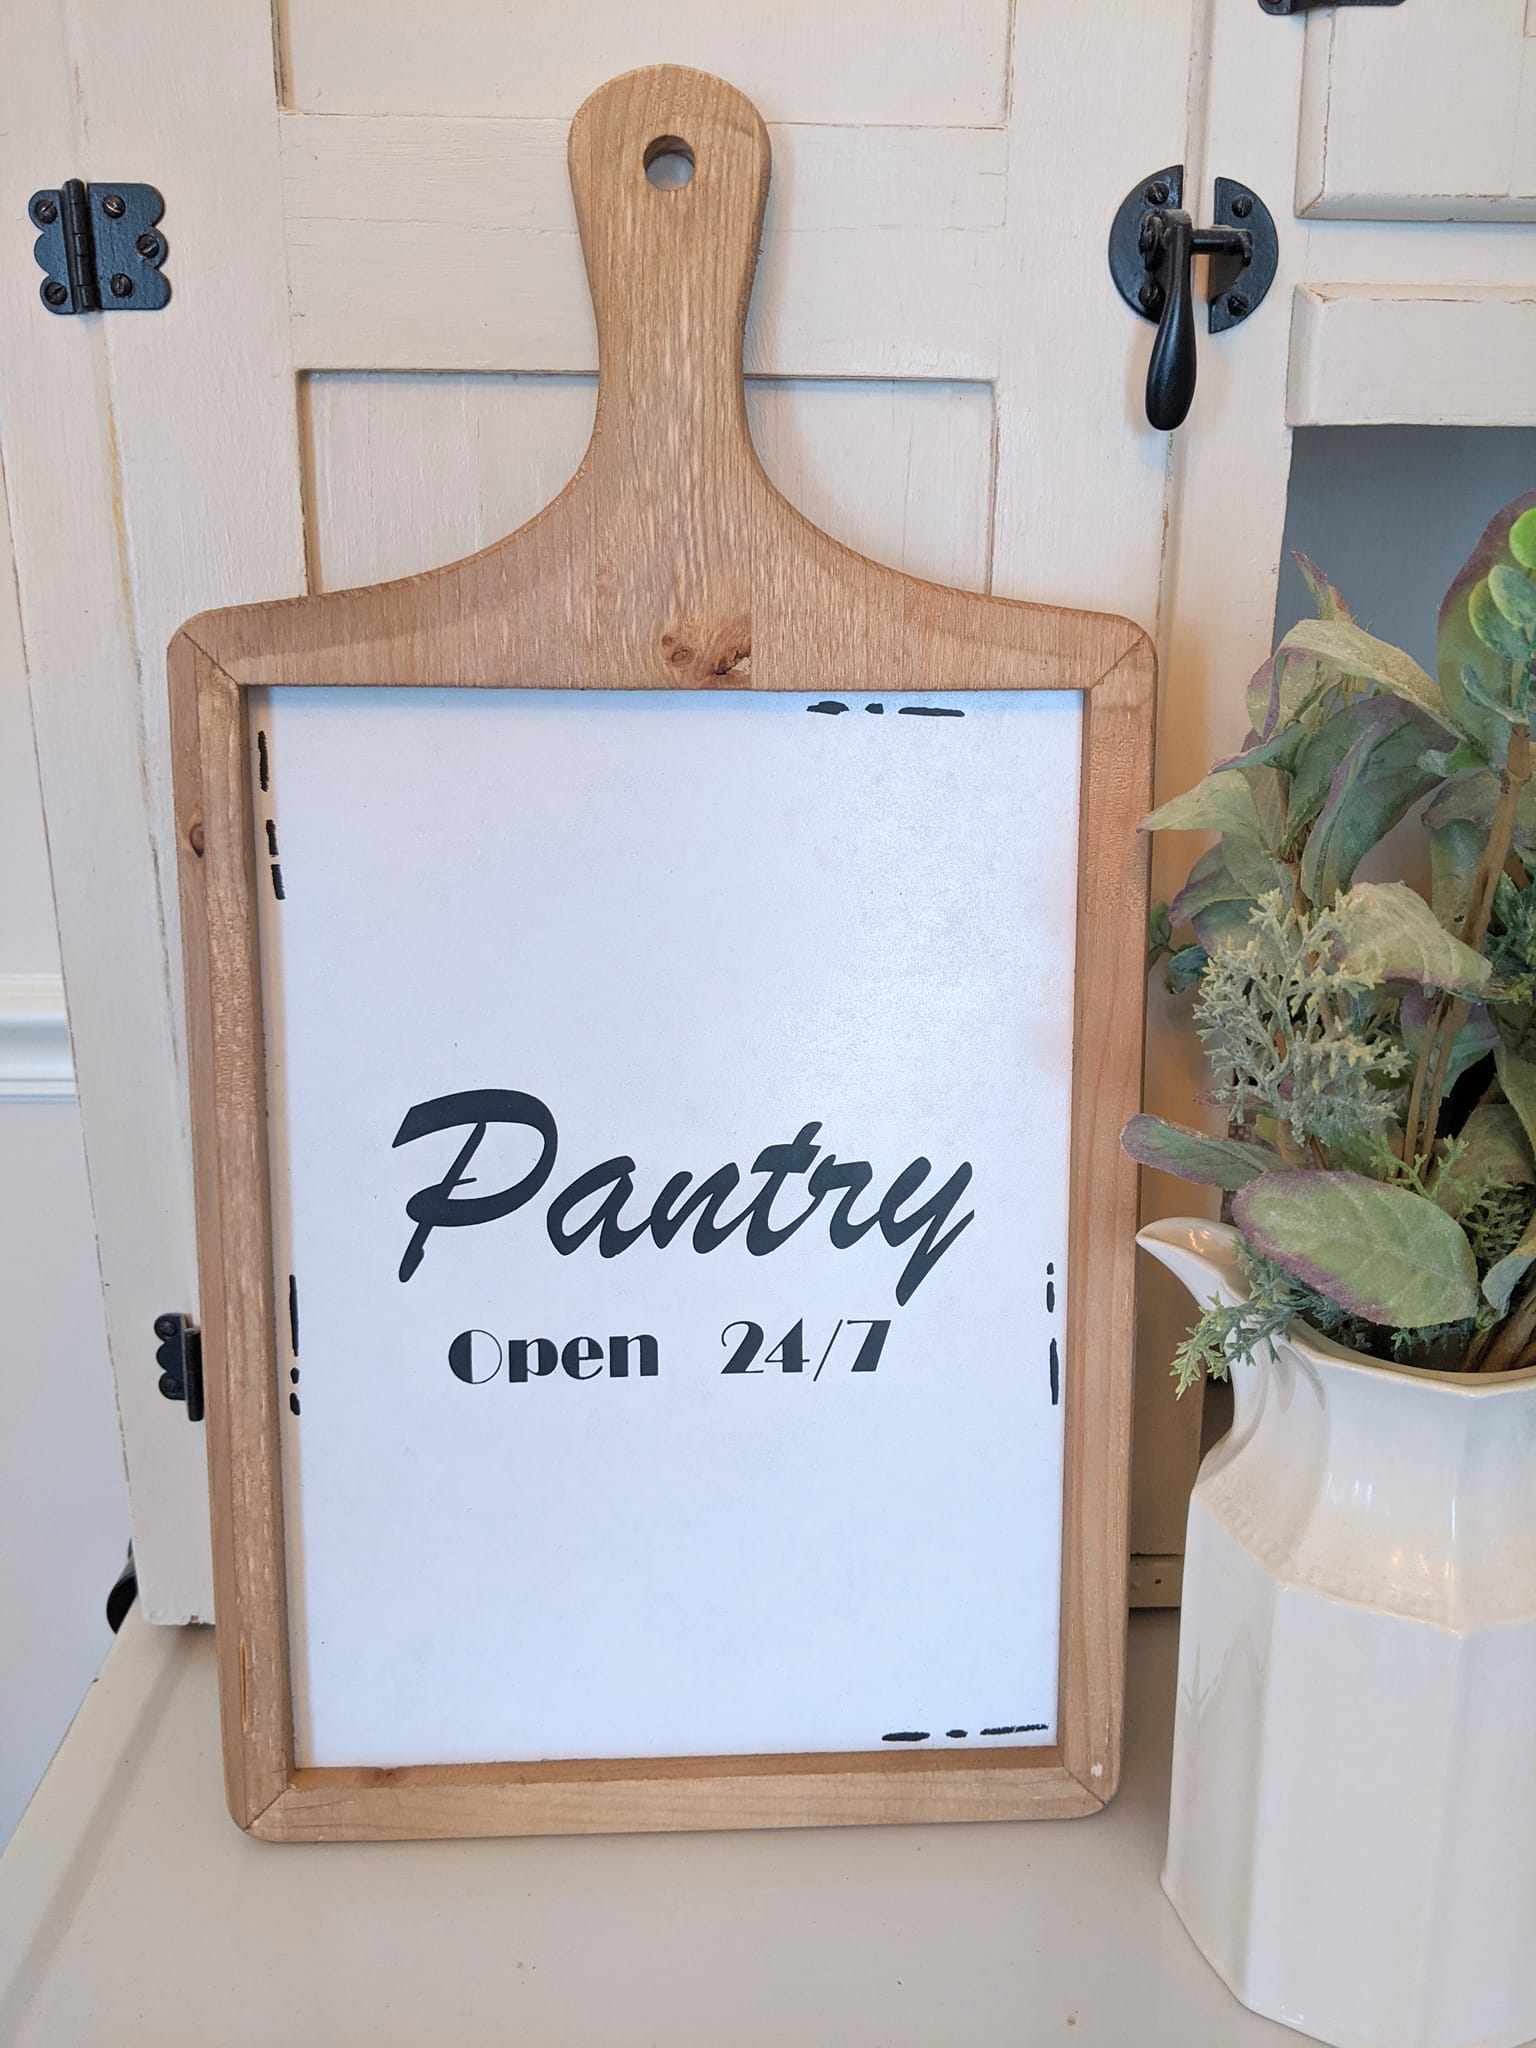 Pantry Wood Sign